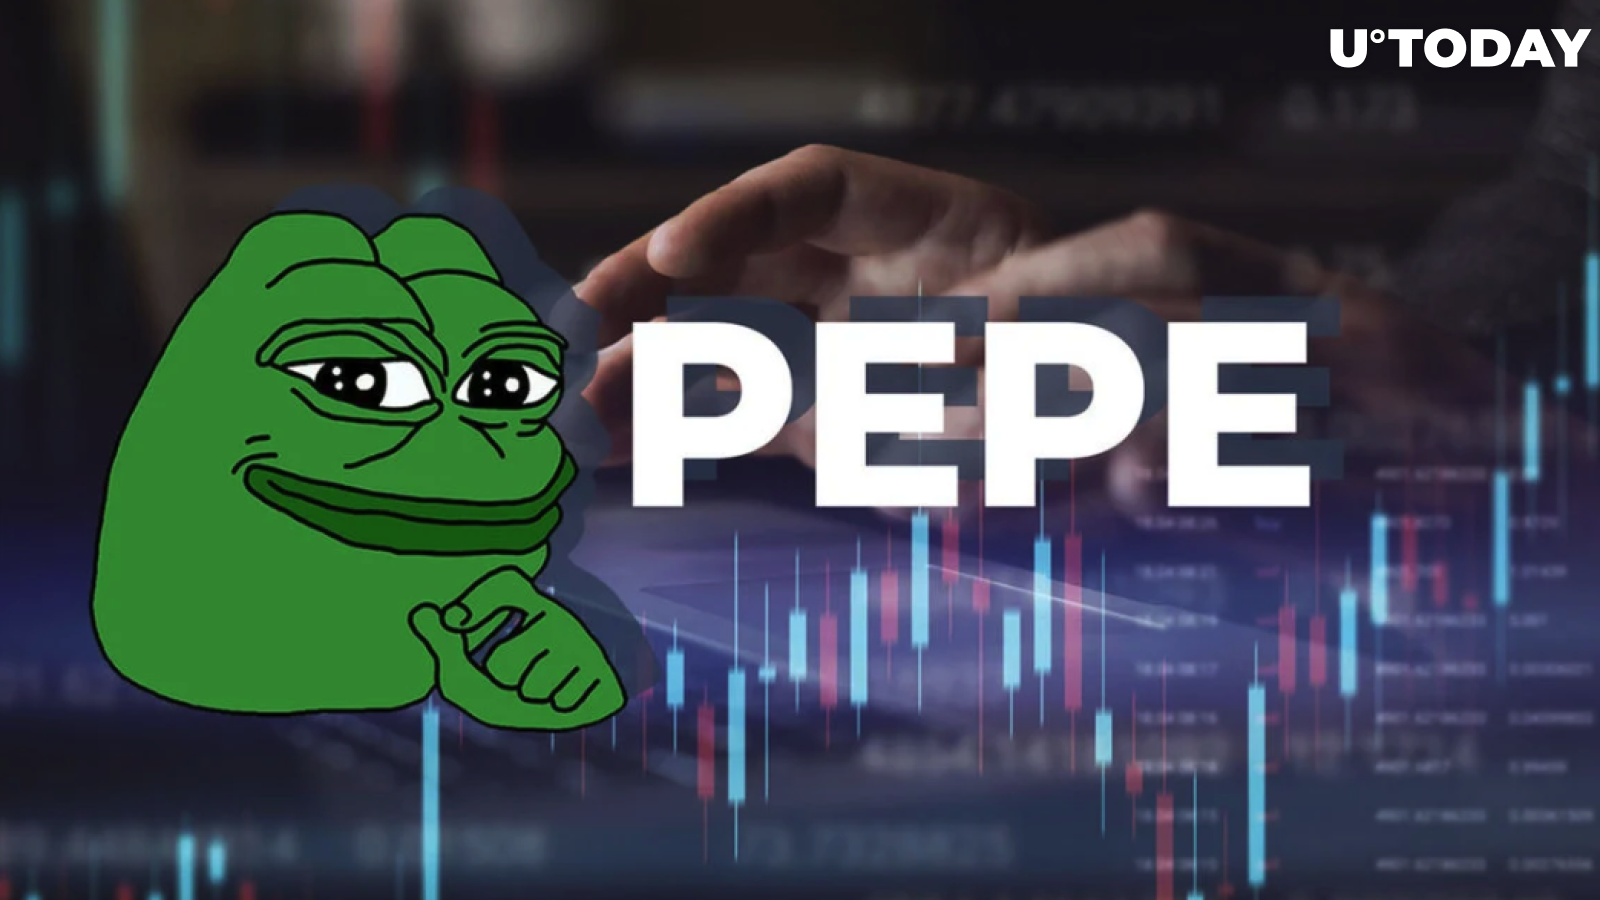 Former "Dogecoin Millionaire" Reveals the Best Time to Invest in Pepe